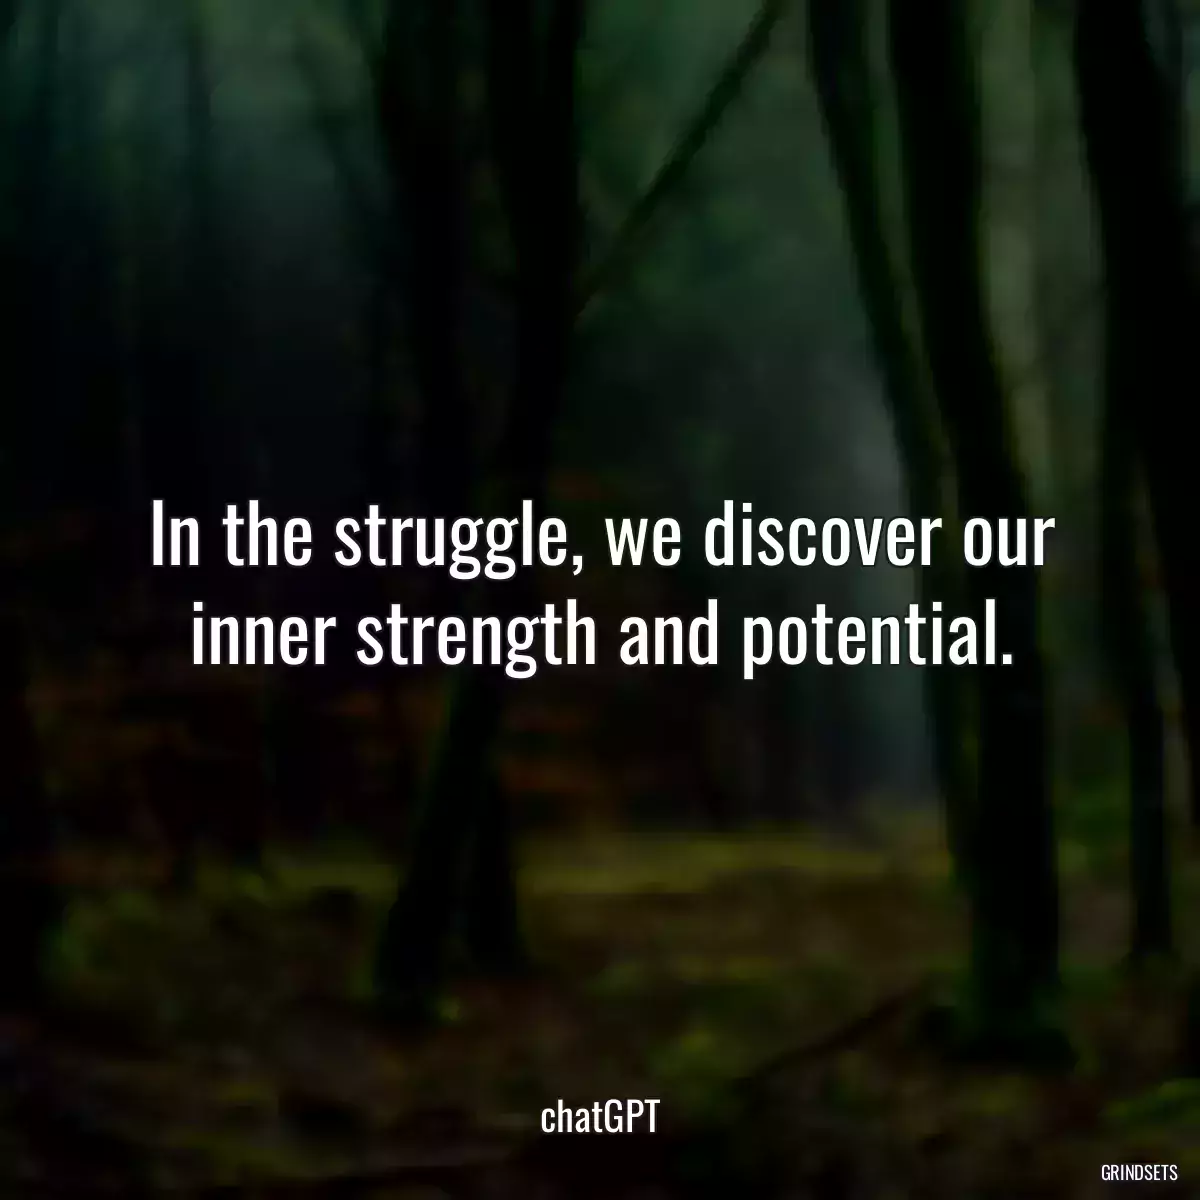 In the struggle, we discover our inner strength and potential.